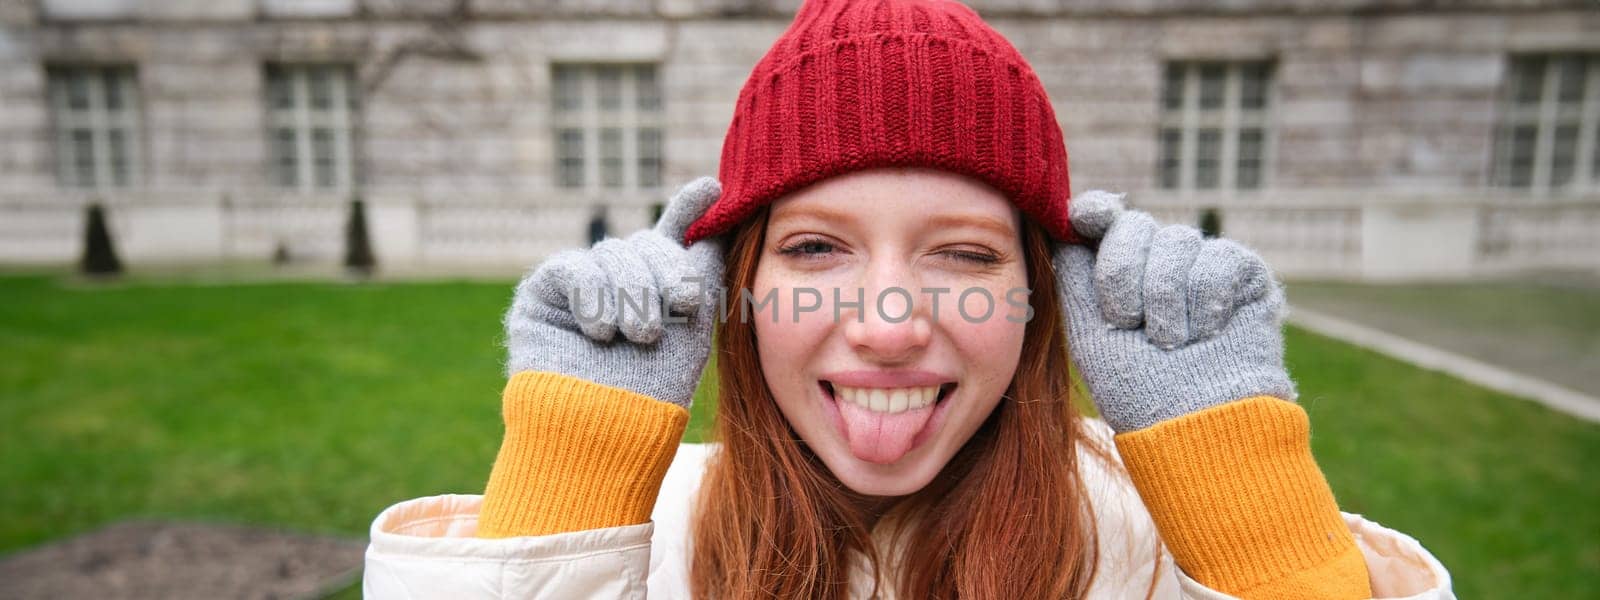 Portrait of funny and cute redhead girl puts on red hat, shows tongue and winks at camera, smiles happily, enjoys great weather in park.